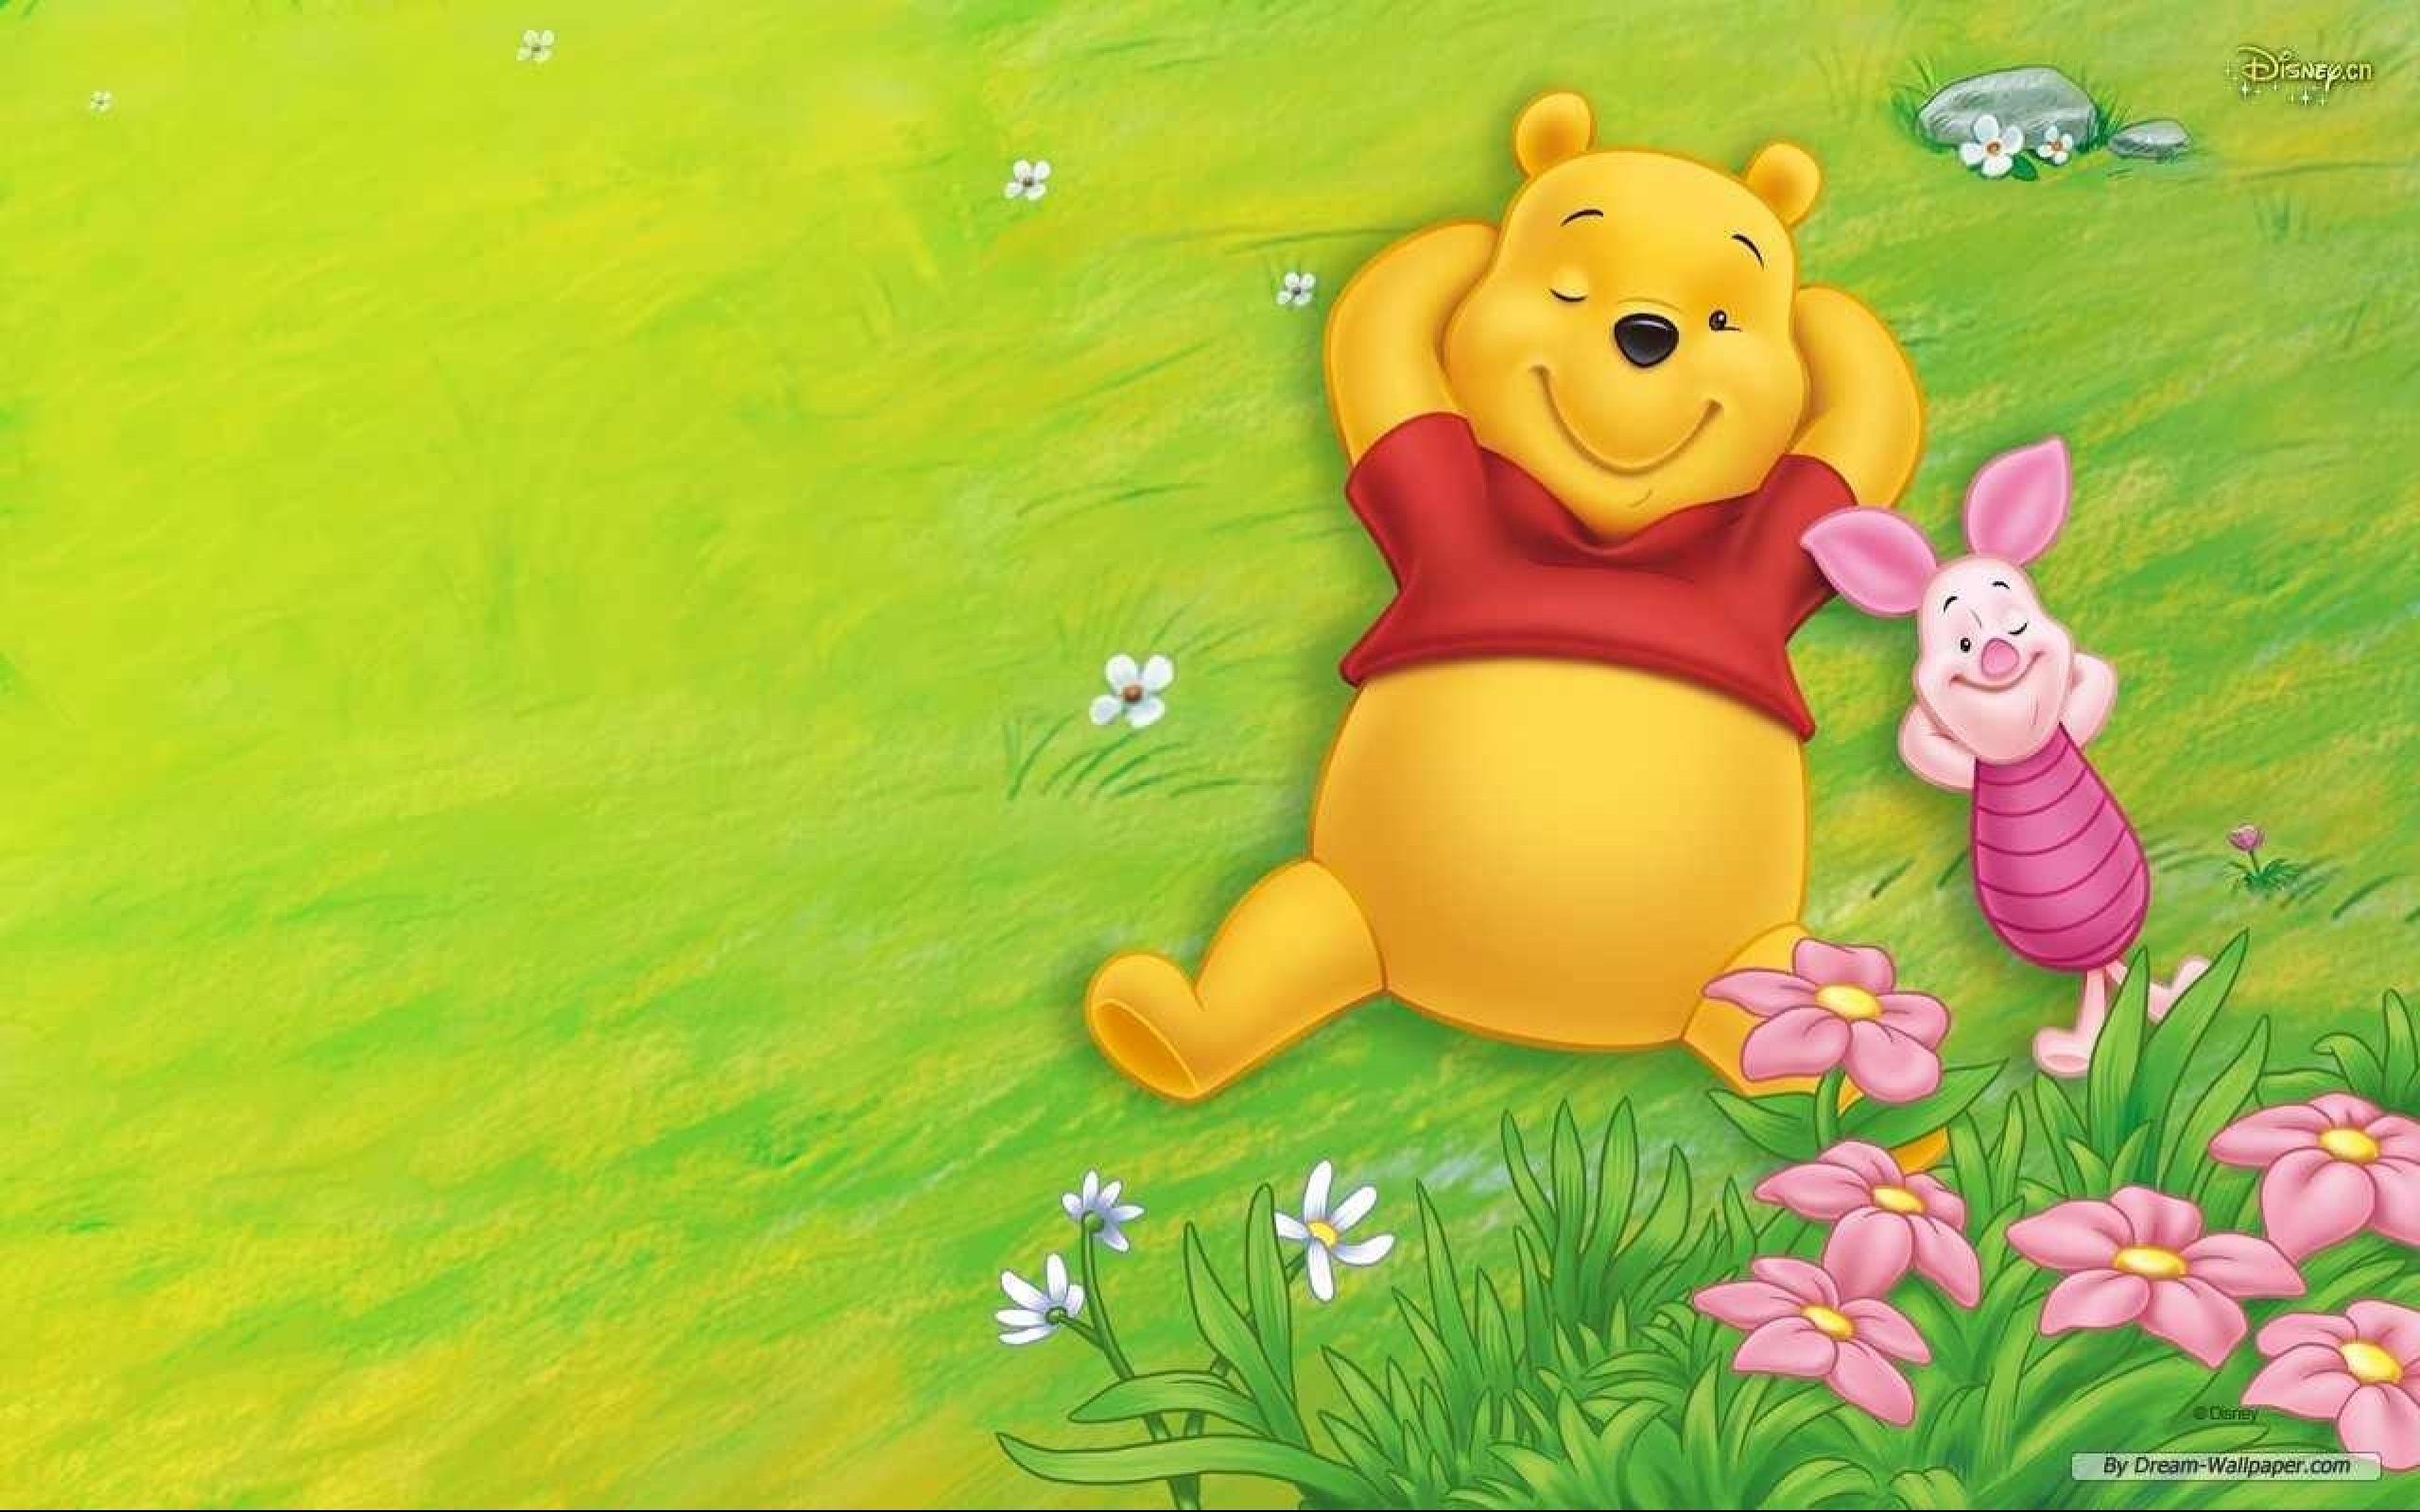 Fantastic Wallpaper: Winnie The Pooh Wallpaper, Awesome